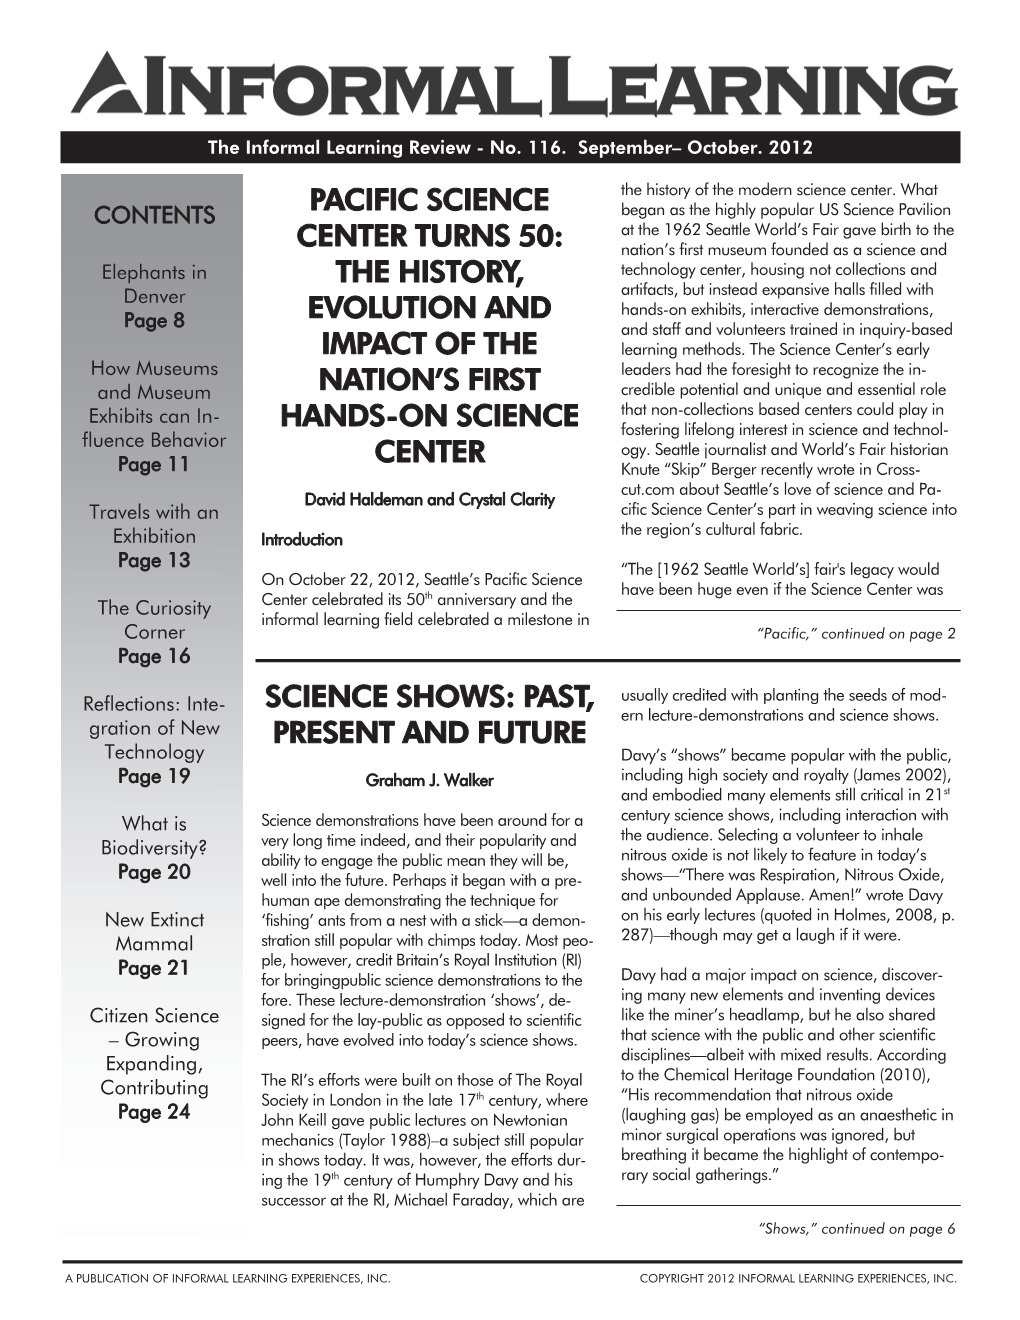 Pacific Science Center Turns 50: the History, Evolution and Impact of The